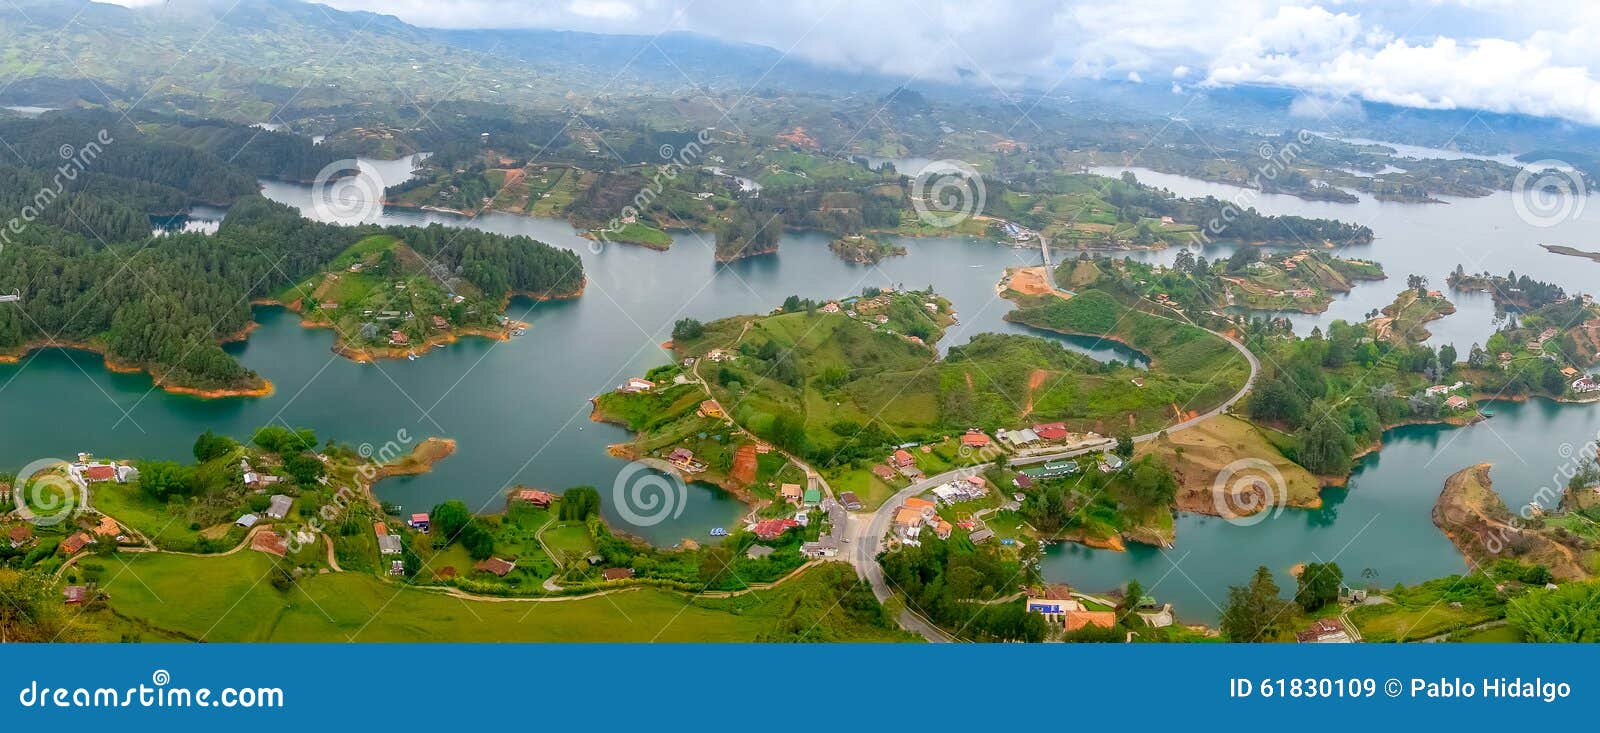 aerial view of guatape in antioquia, colombia